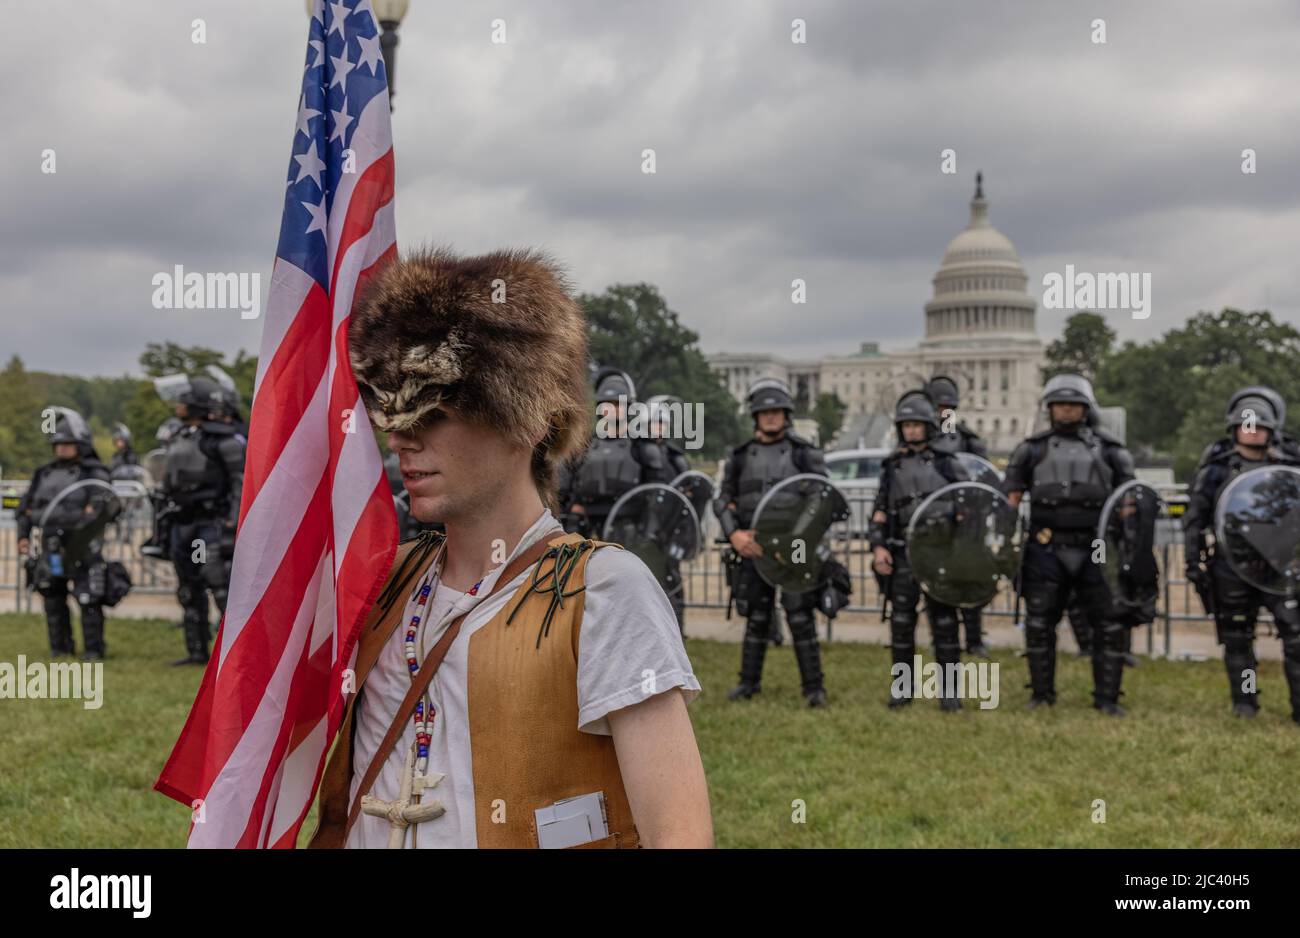 WASHINGTON, D.C. – September 18, 2021: A demonstrator walks away from United States Capitol Police officers during a “Justice for J6” rally. Stock Photo